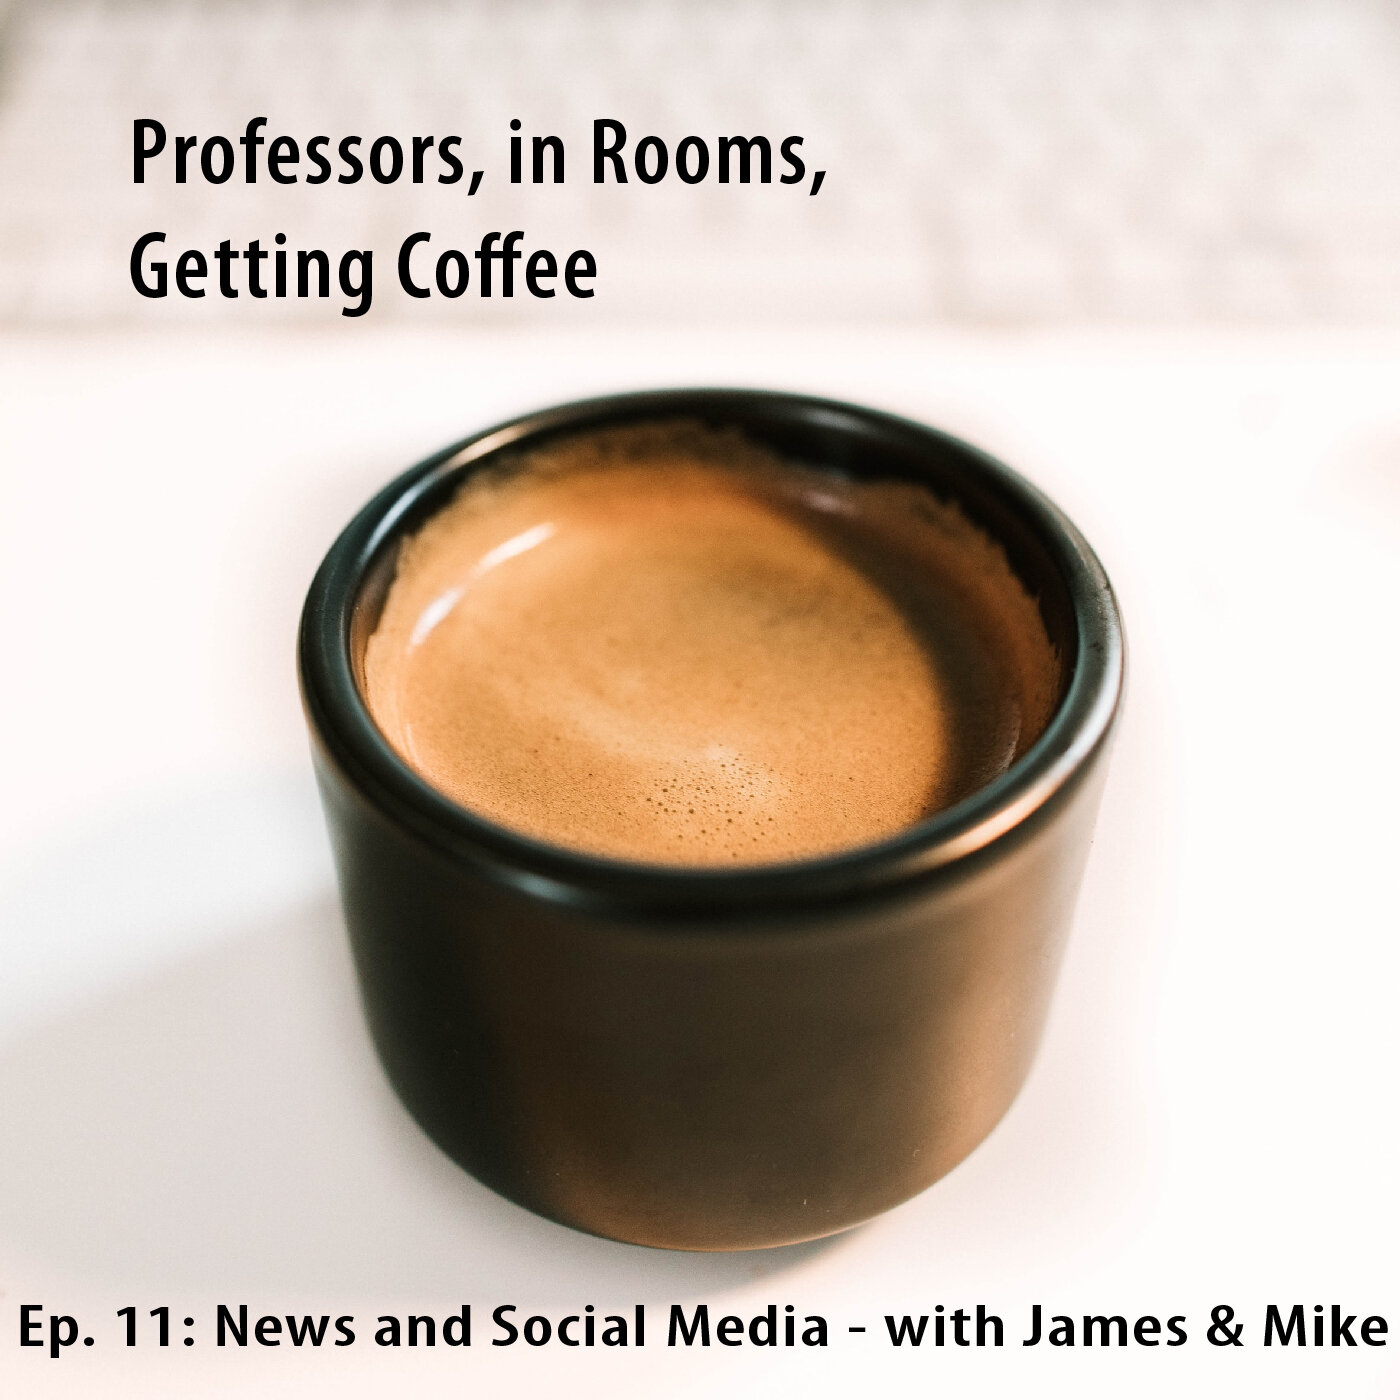 News and Social Media - with James and Mike